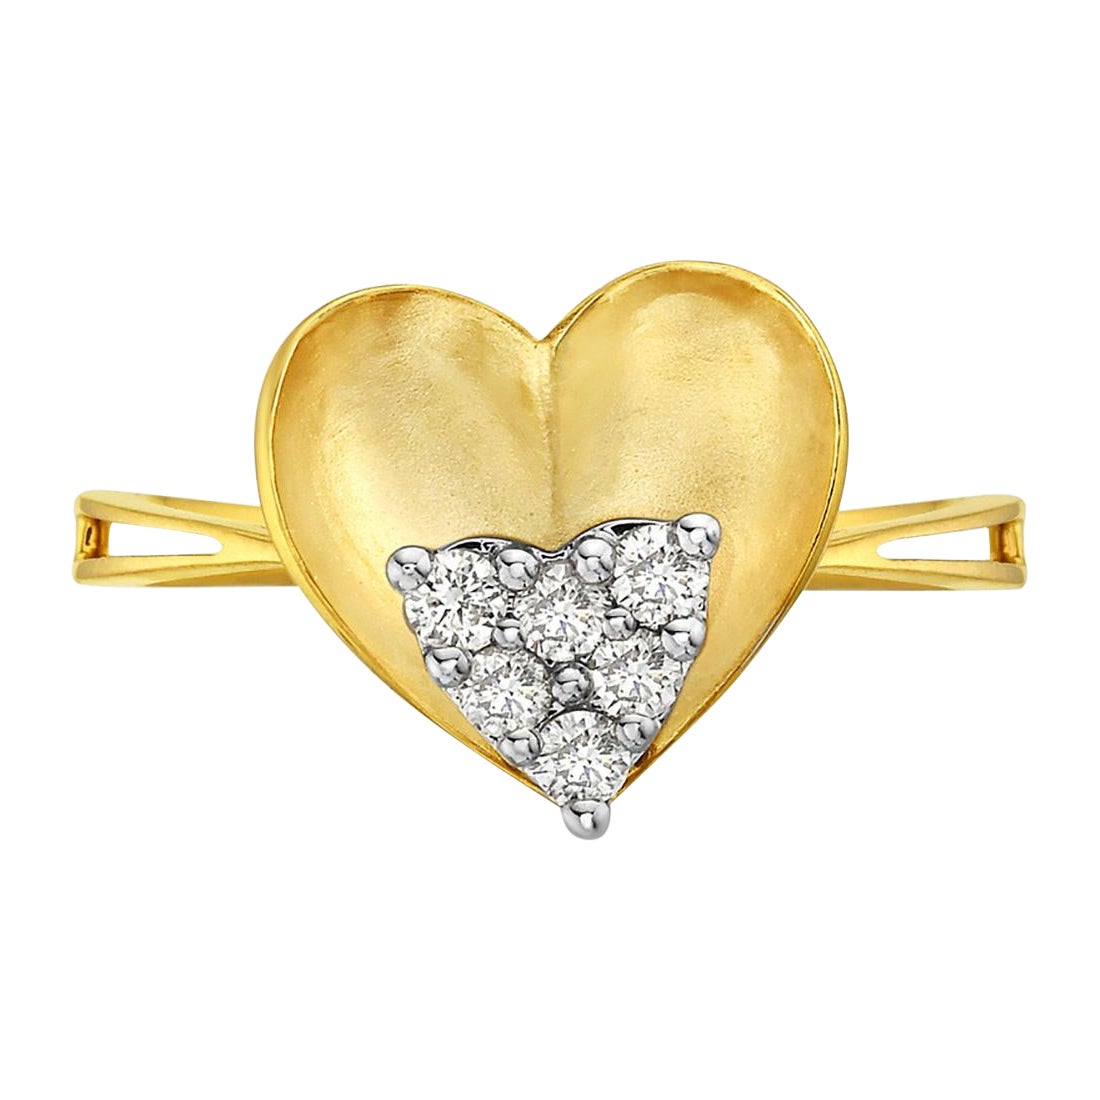 Heart Shape 14k Yellow Gold Classic Ring Equipped with Diamonds in the Center